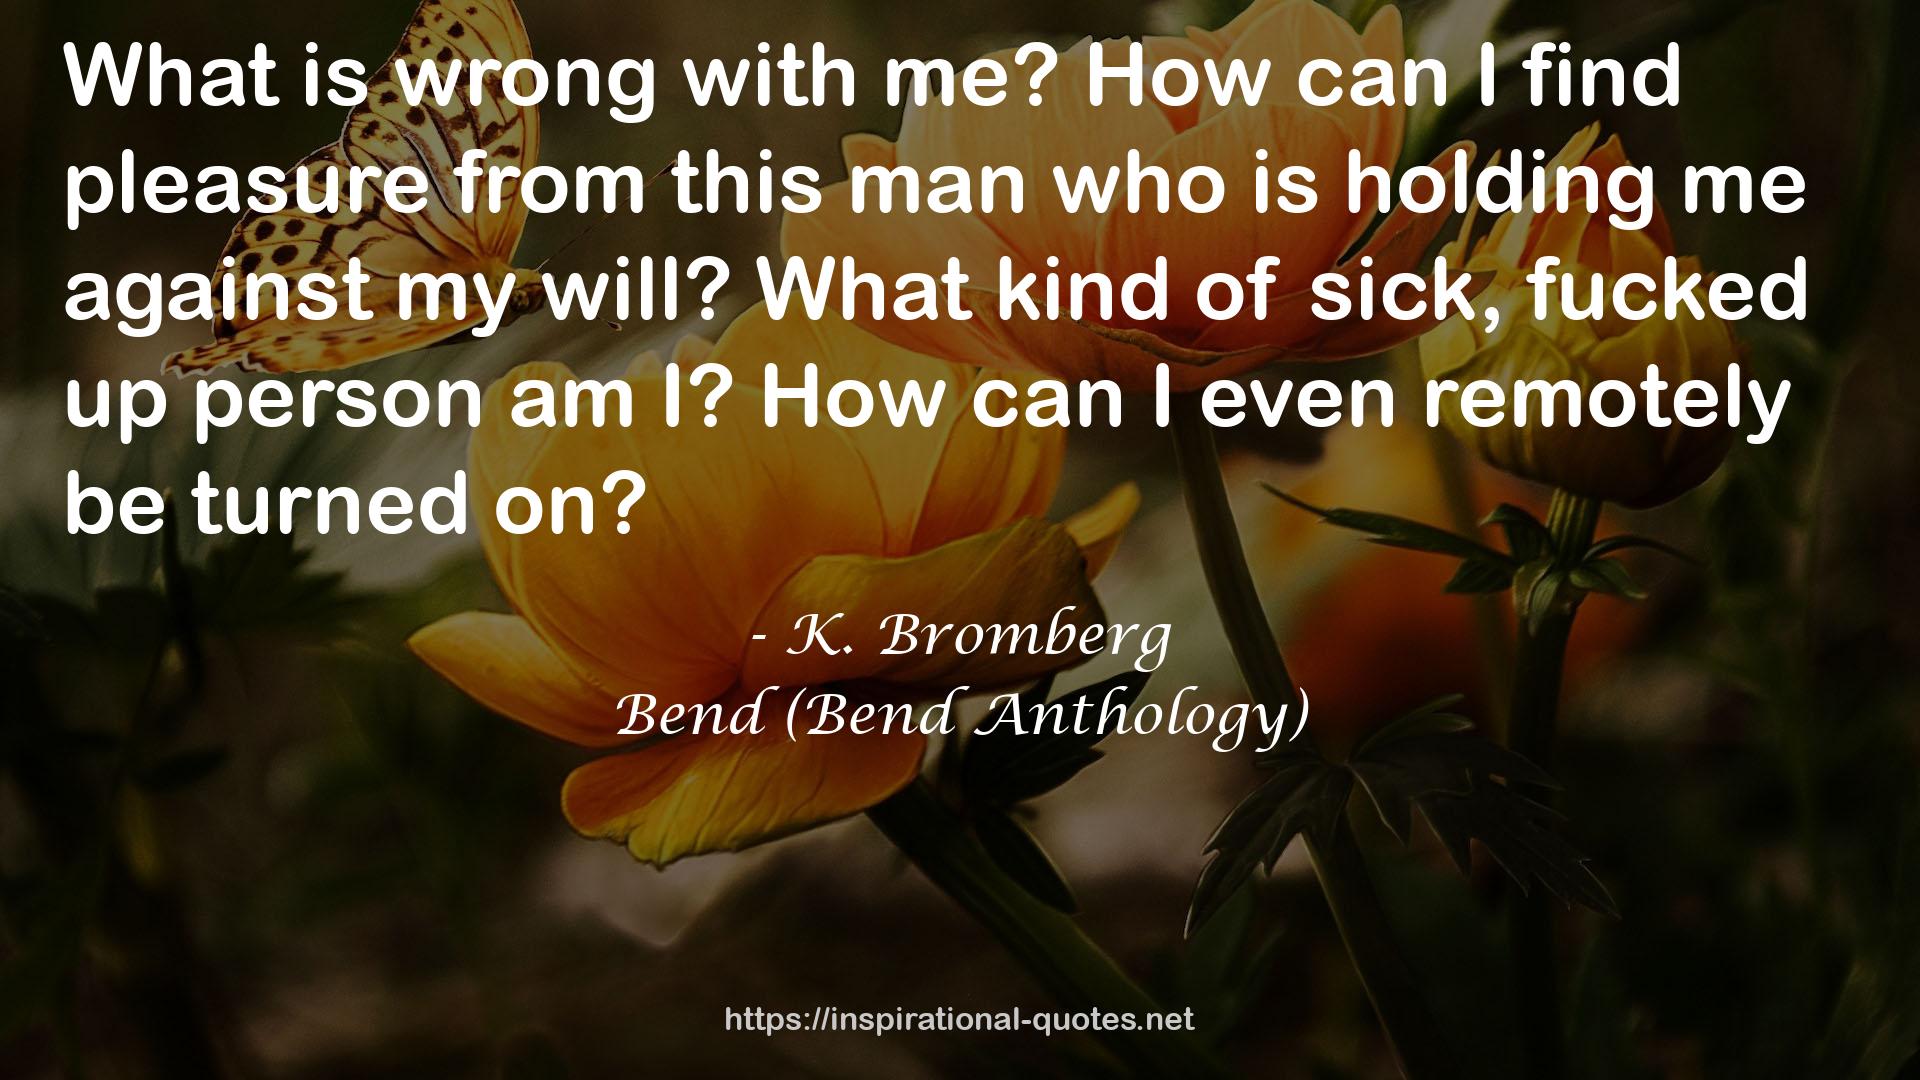 Bend (Bend Anthology) QUOTES